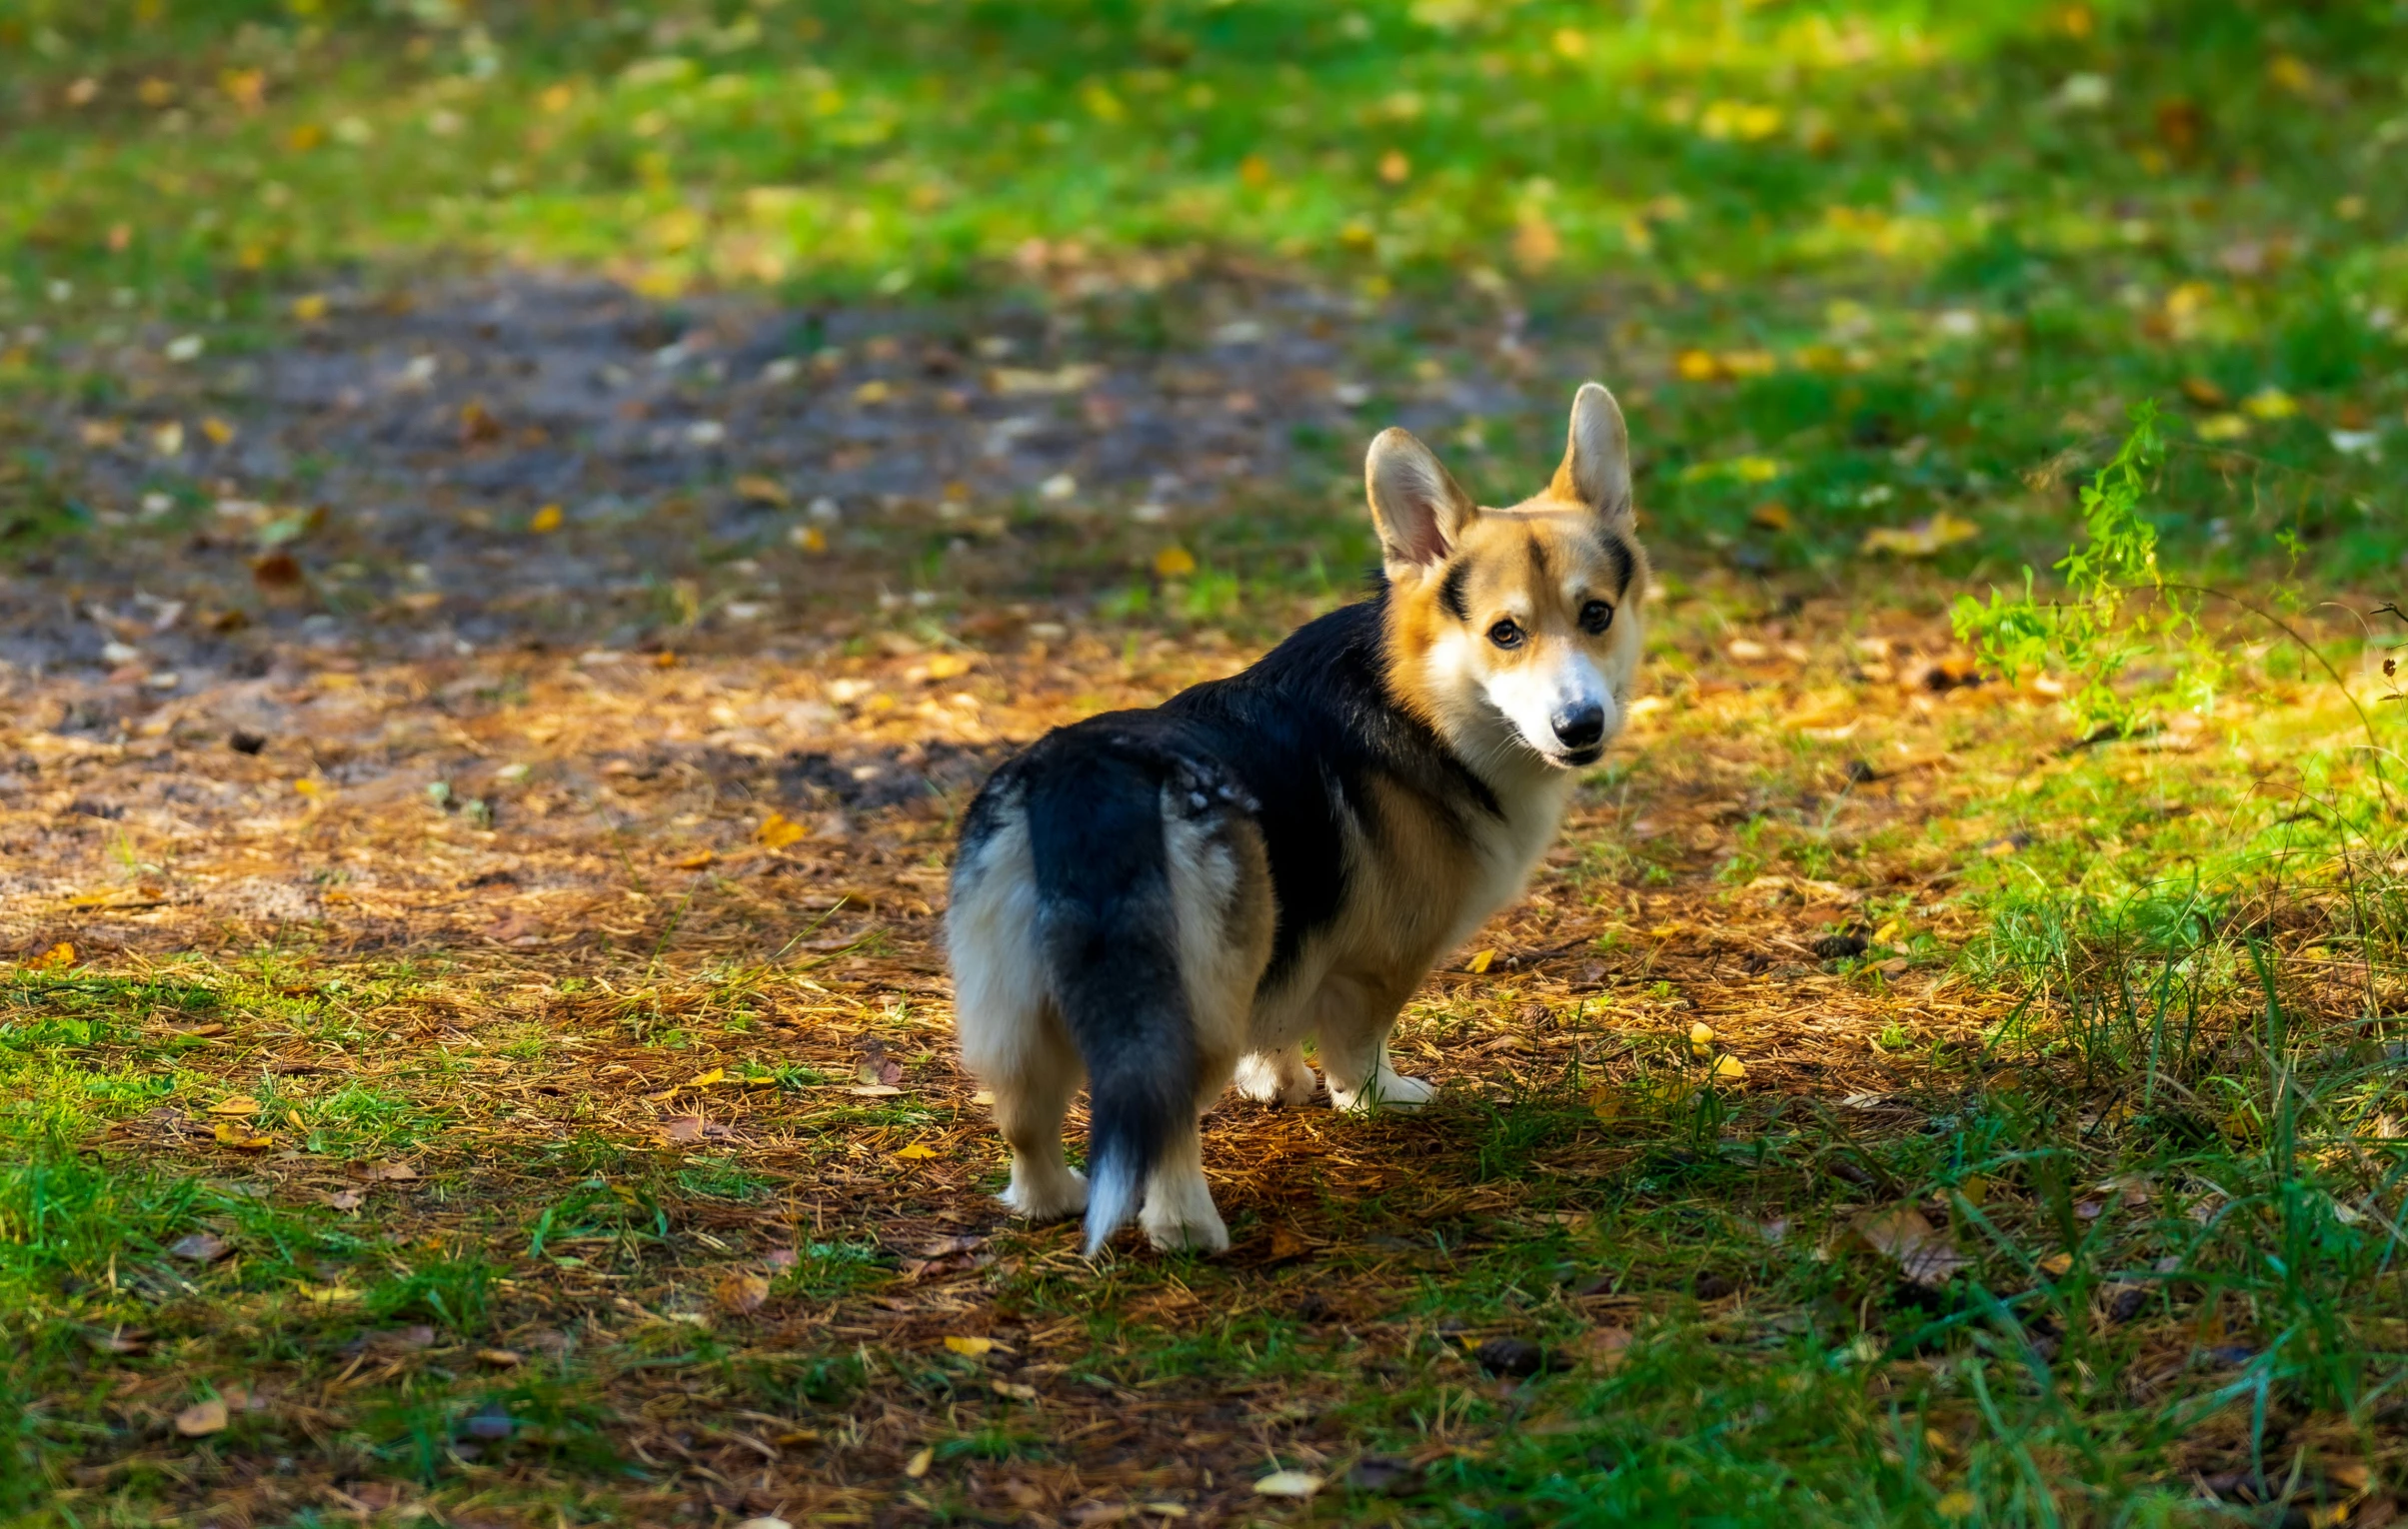 a dog standing on the grass with trees in the background